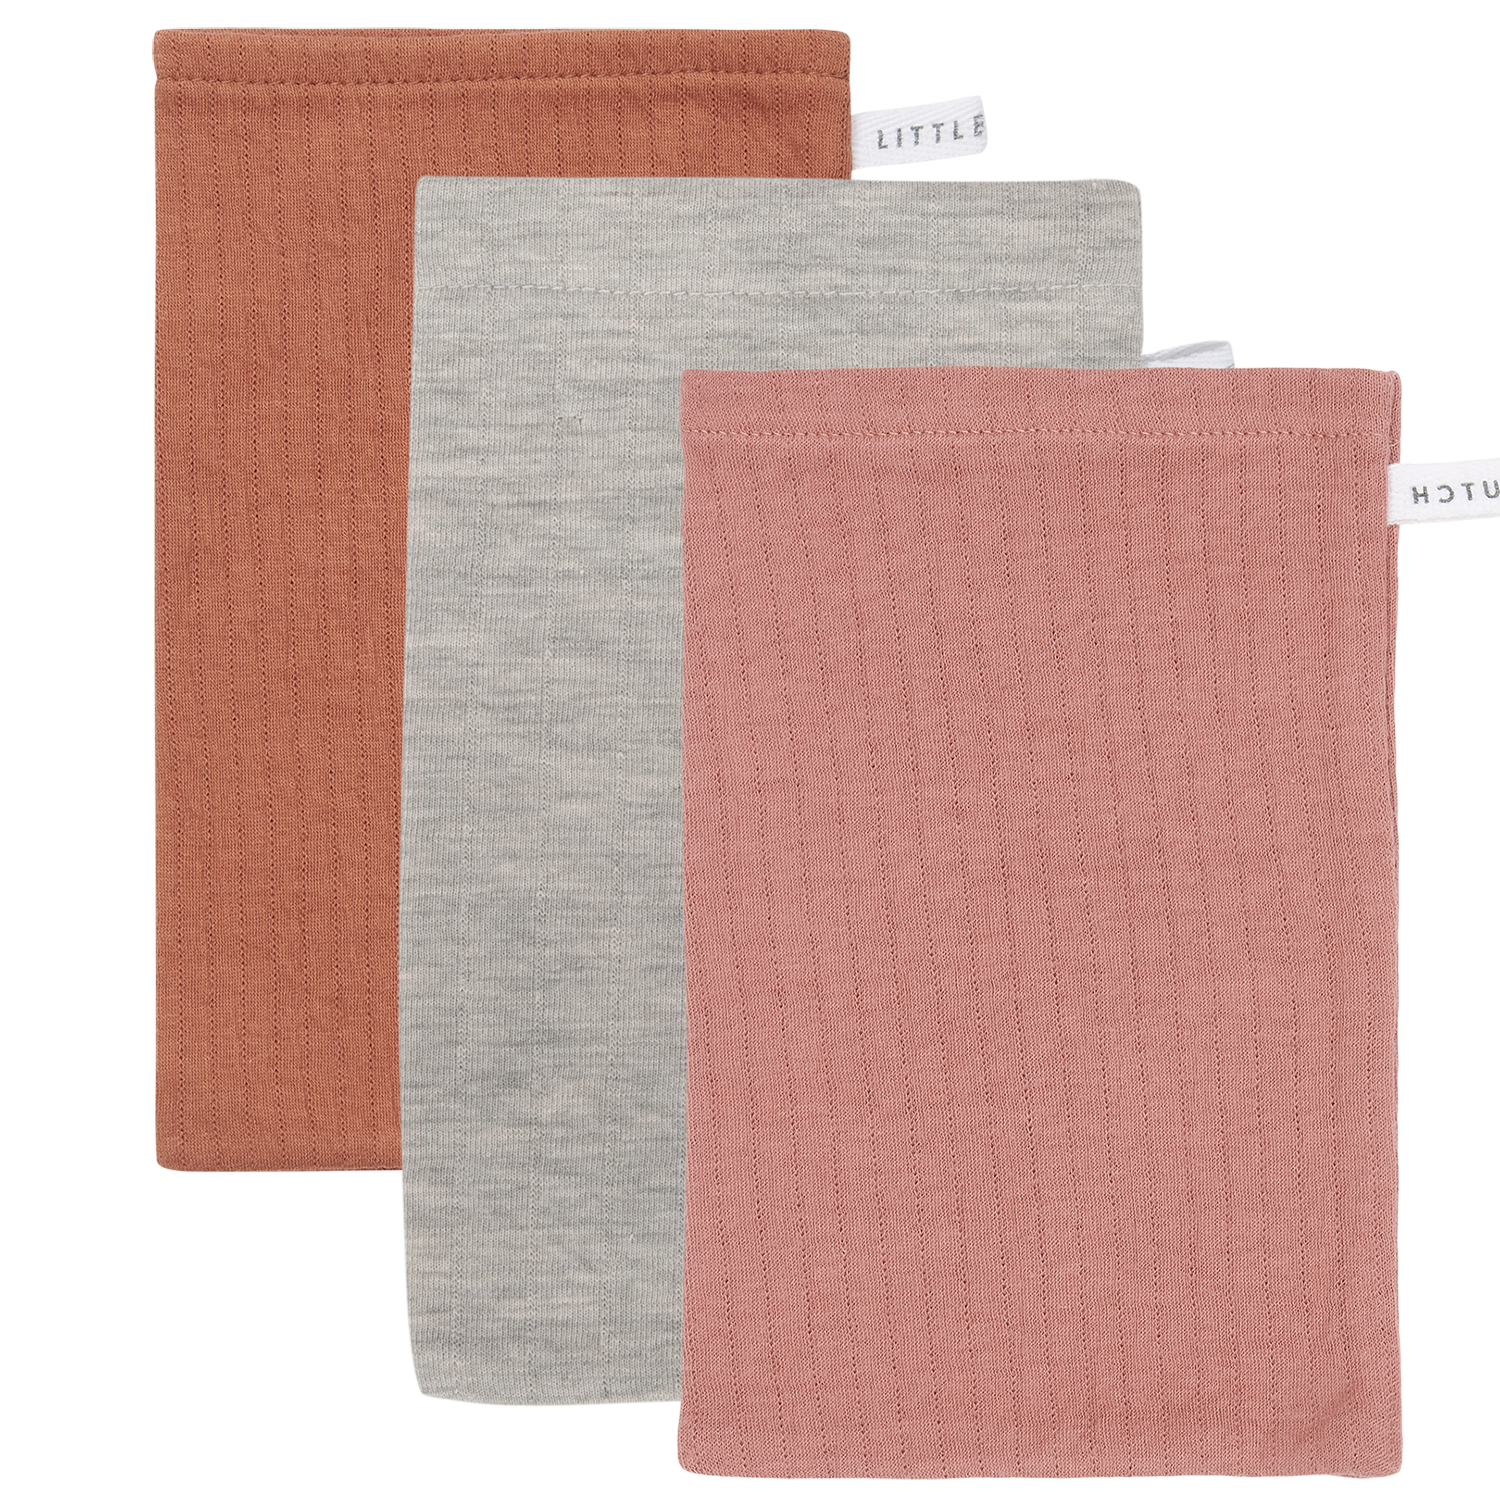 Waschlappen 3er Set Pure olive / Pure grau / Pure pink blush